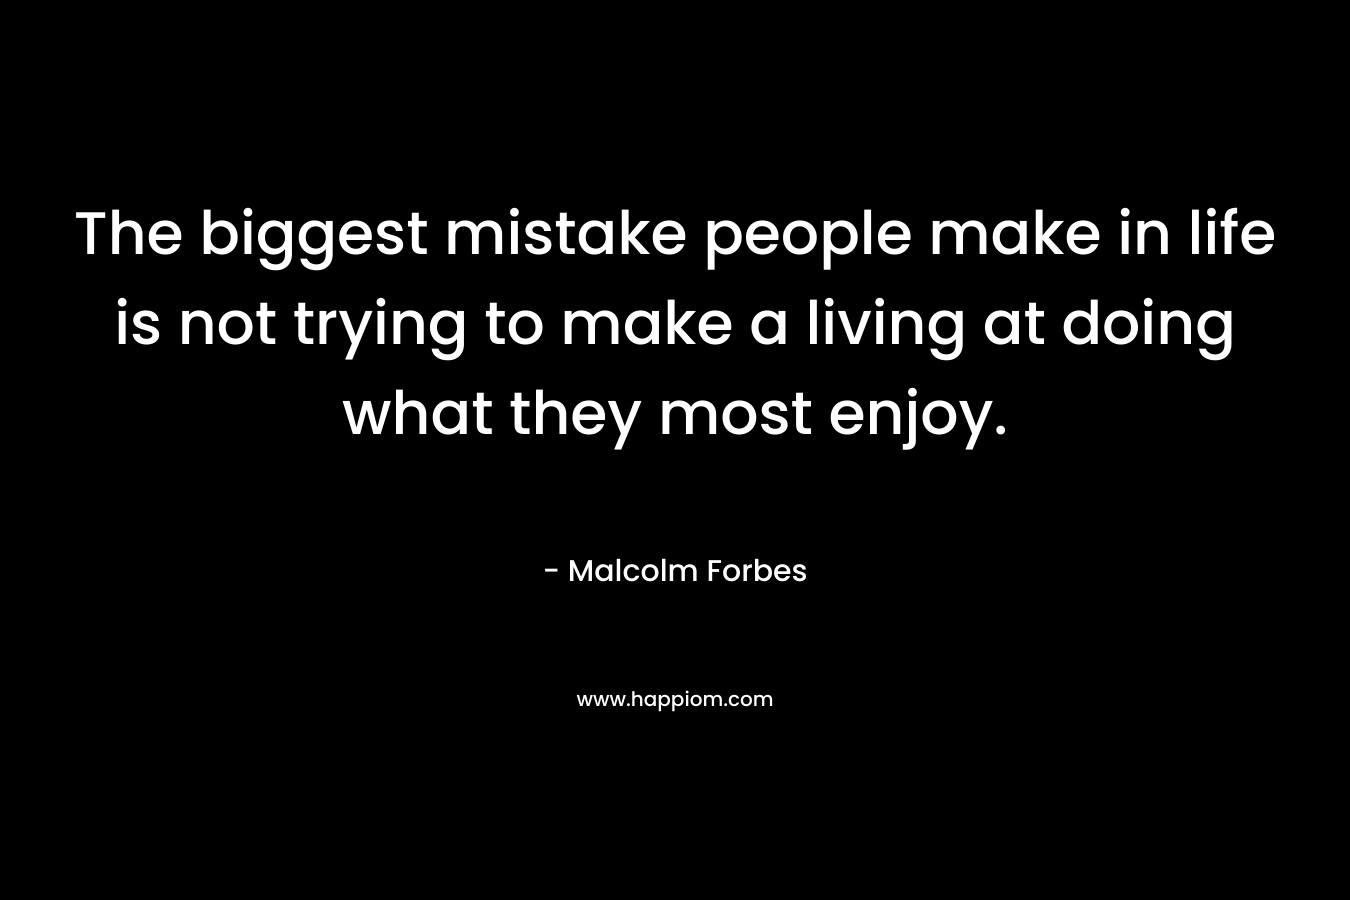 The biggest mistake people make in life is not trying to make a living at doing what they most enjoy. – Malcolm Forbes